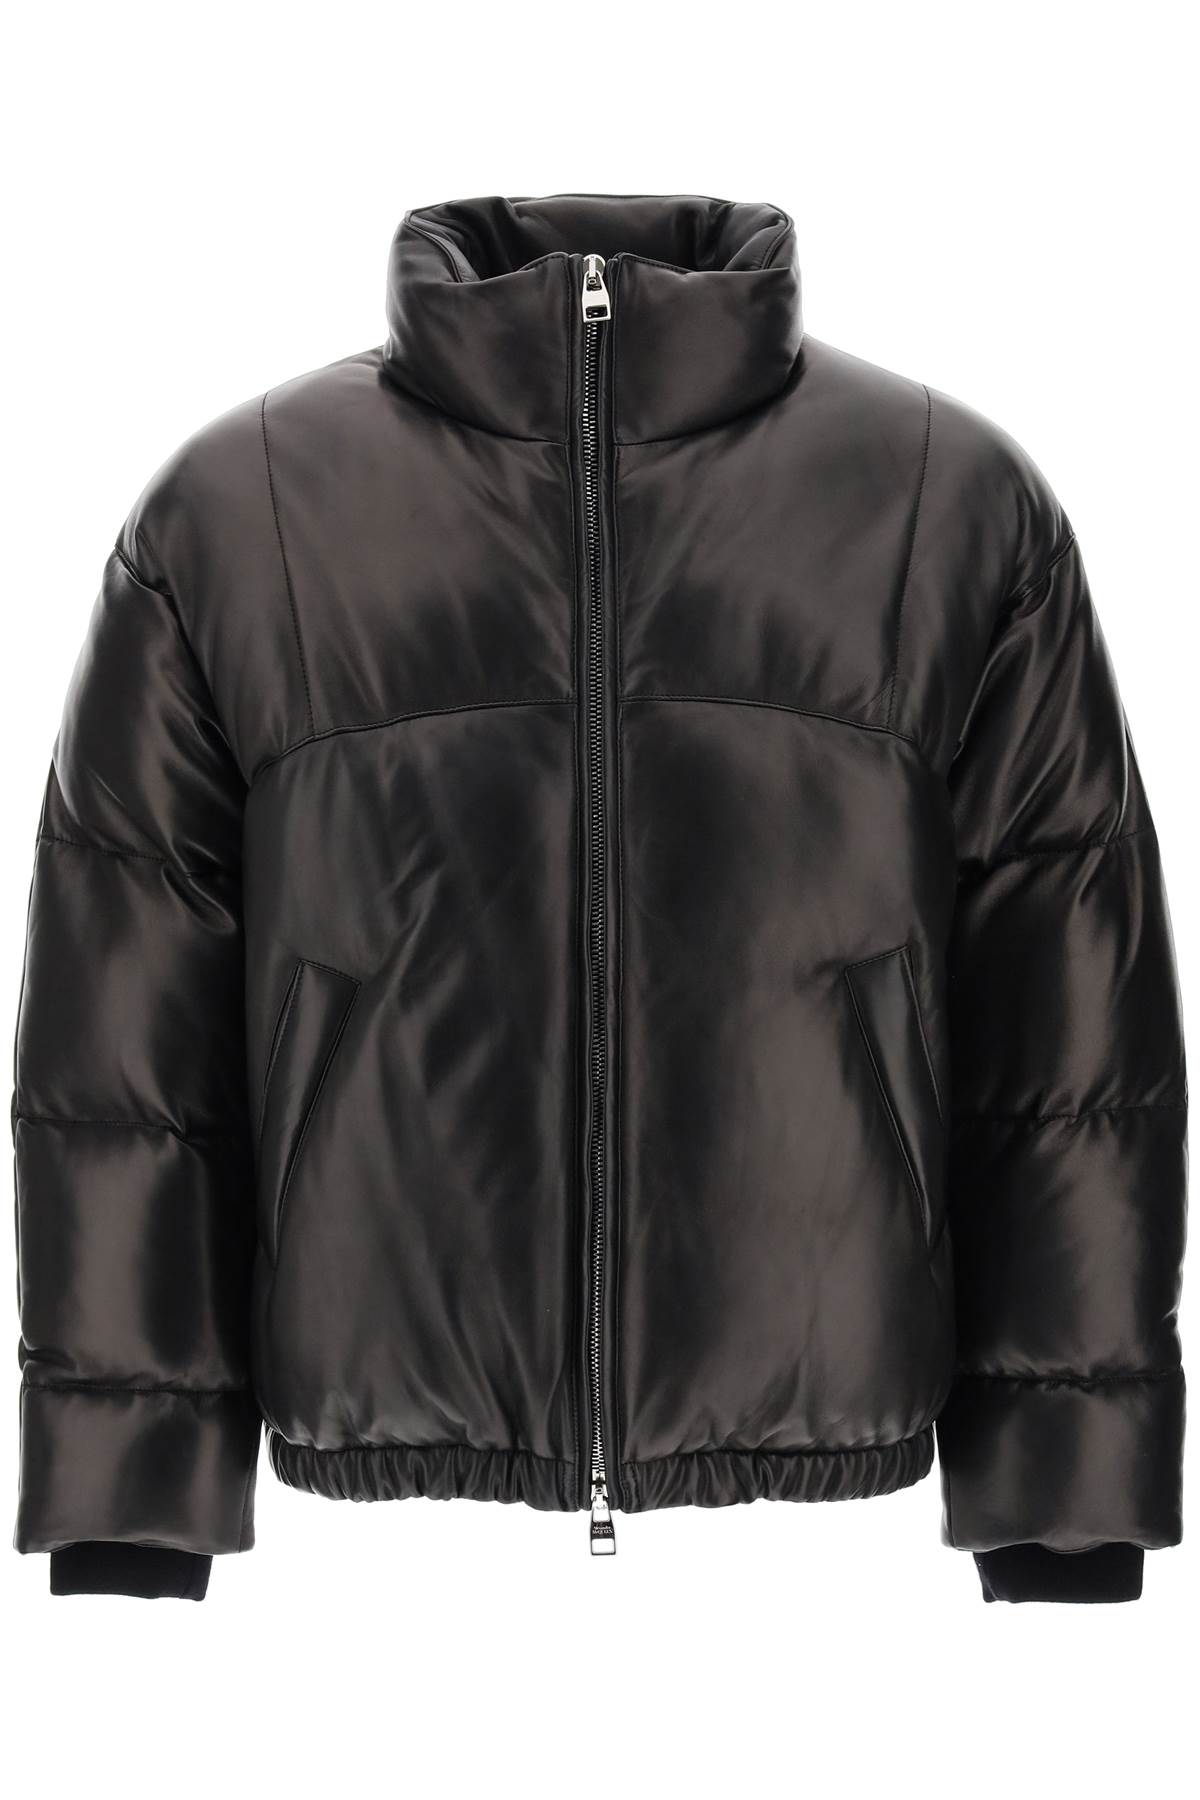 Alexander mcqueen quilted leather puffer jacket-0